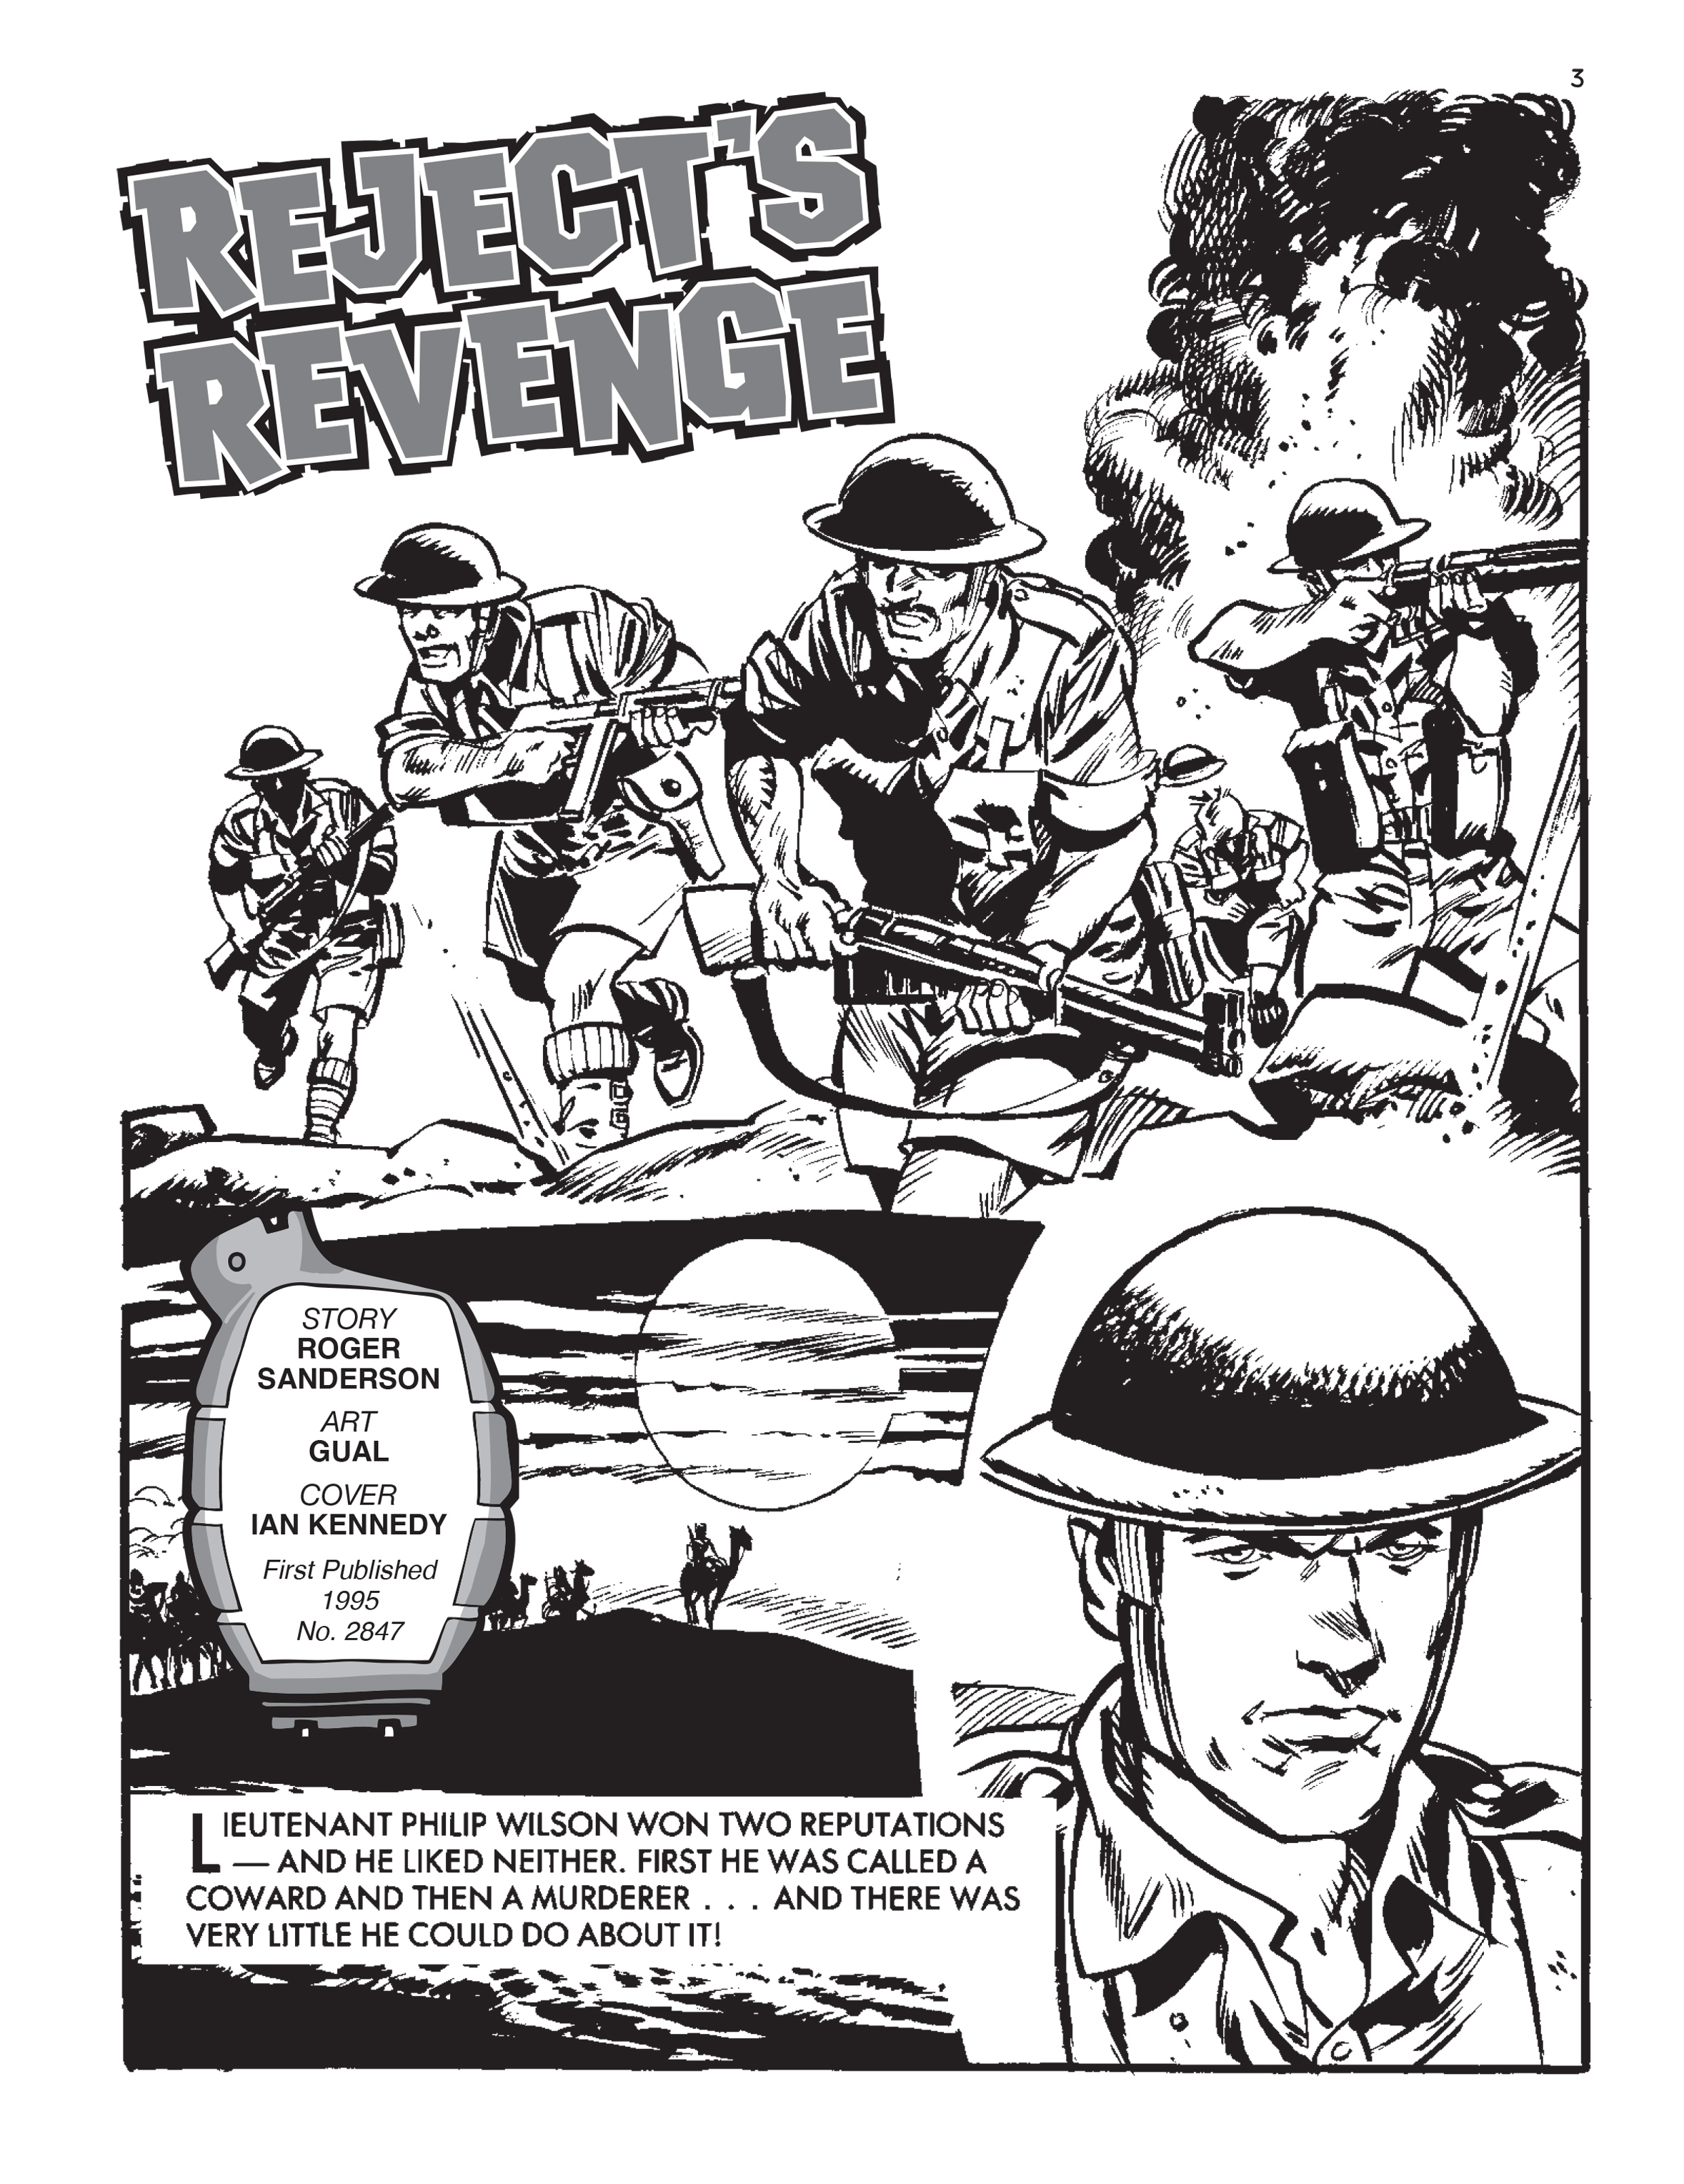 Read online Commando: For Action and Adventure comic -  Issue #5206 - 2